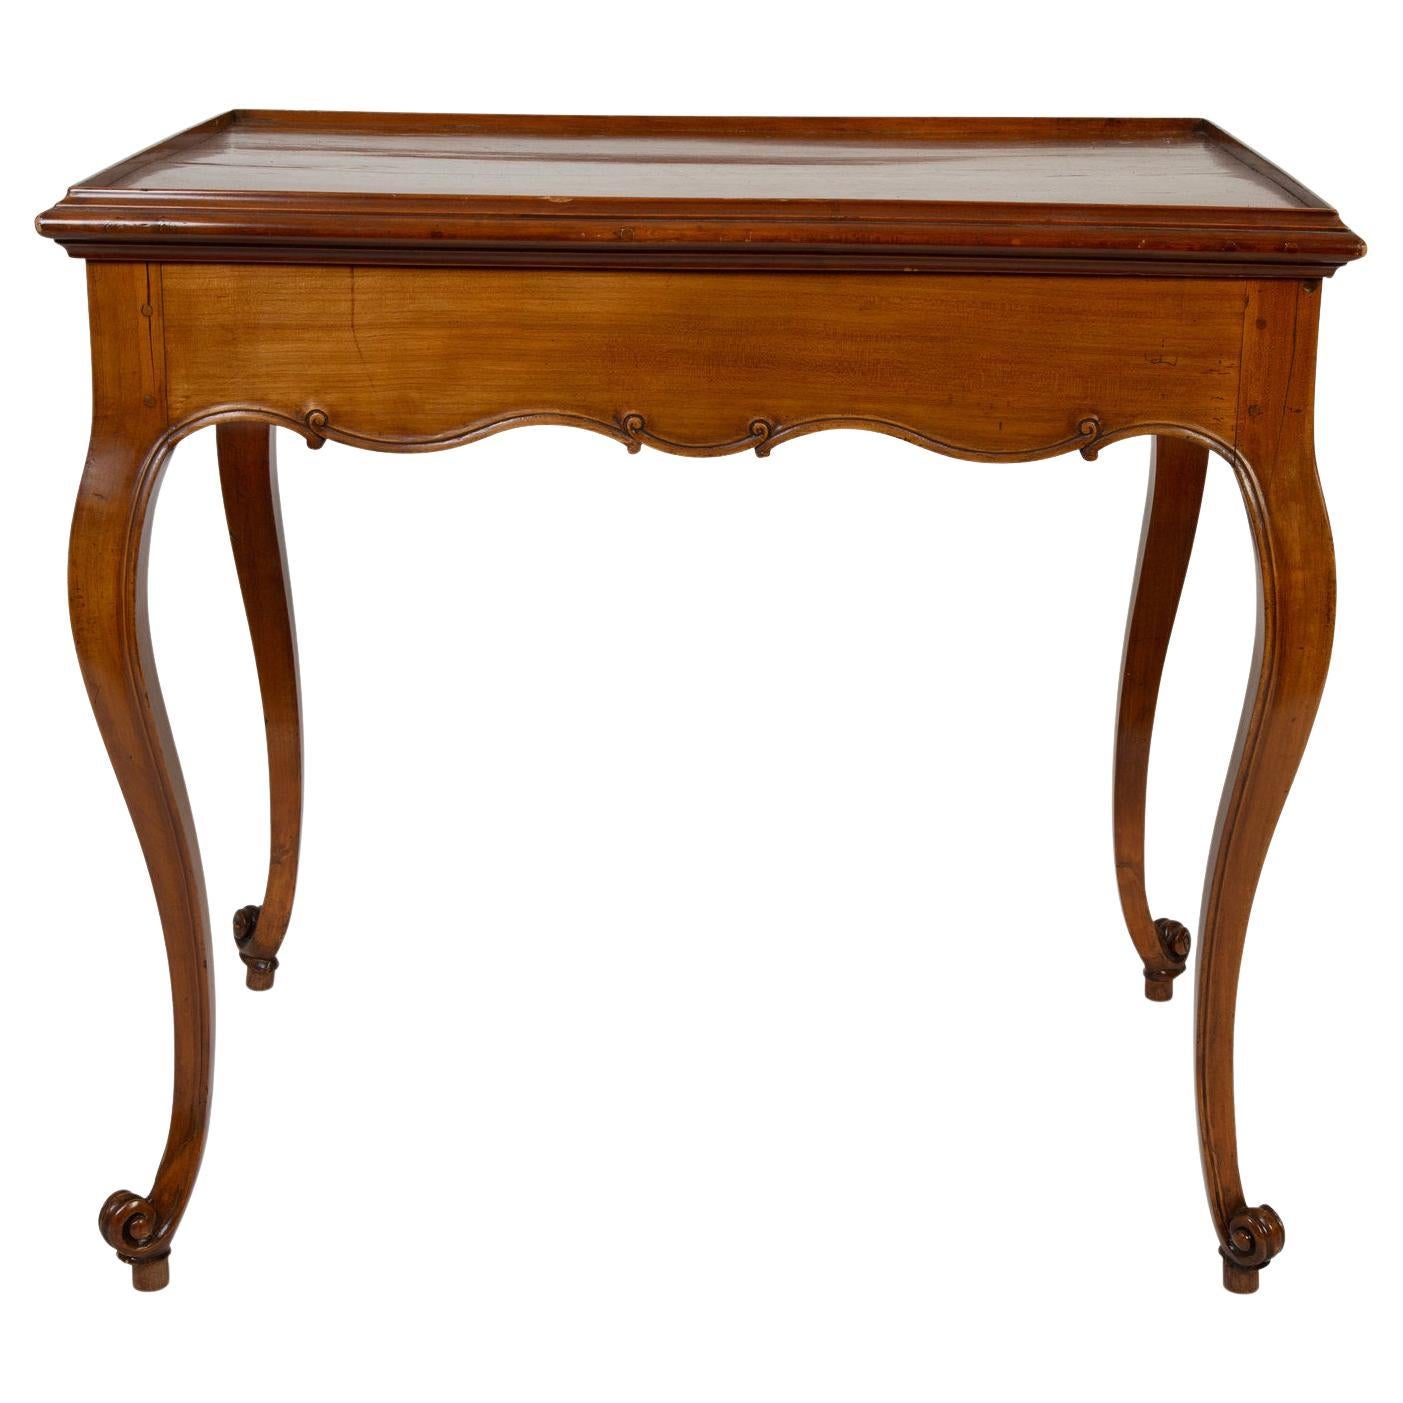 French Provincial Games Table with Cabriolet Legs, Early 20th Century